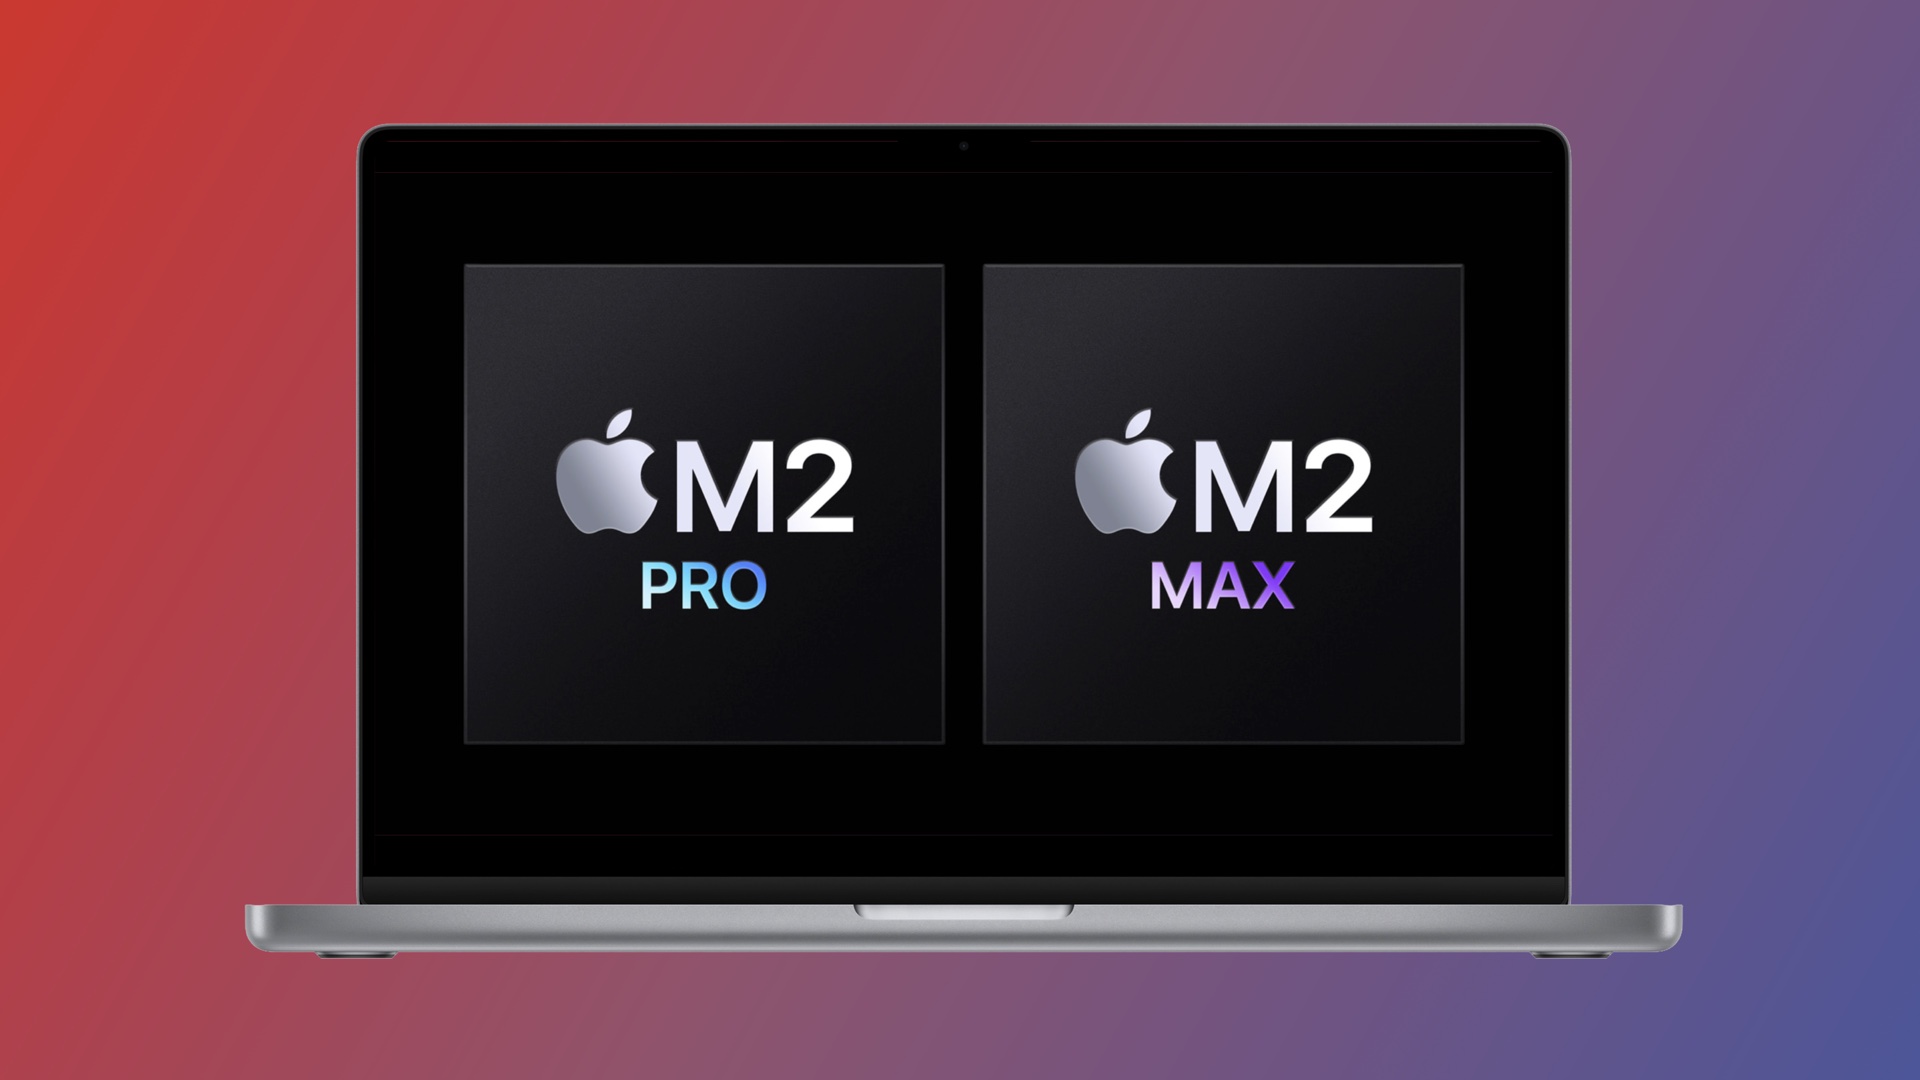 M2 Pro and M2 Max Performance Revealed through Early Benchmarks